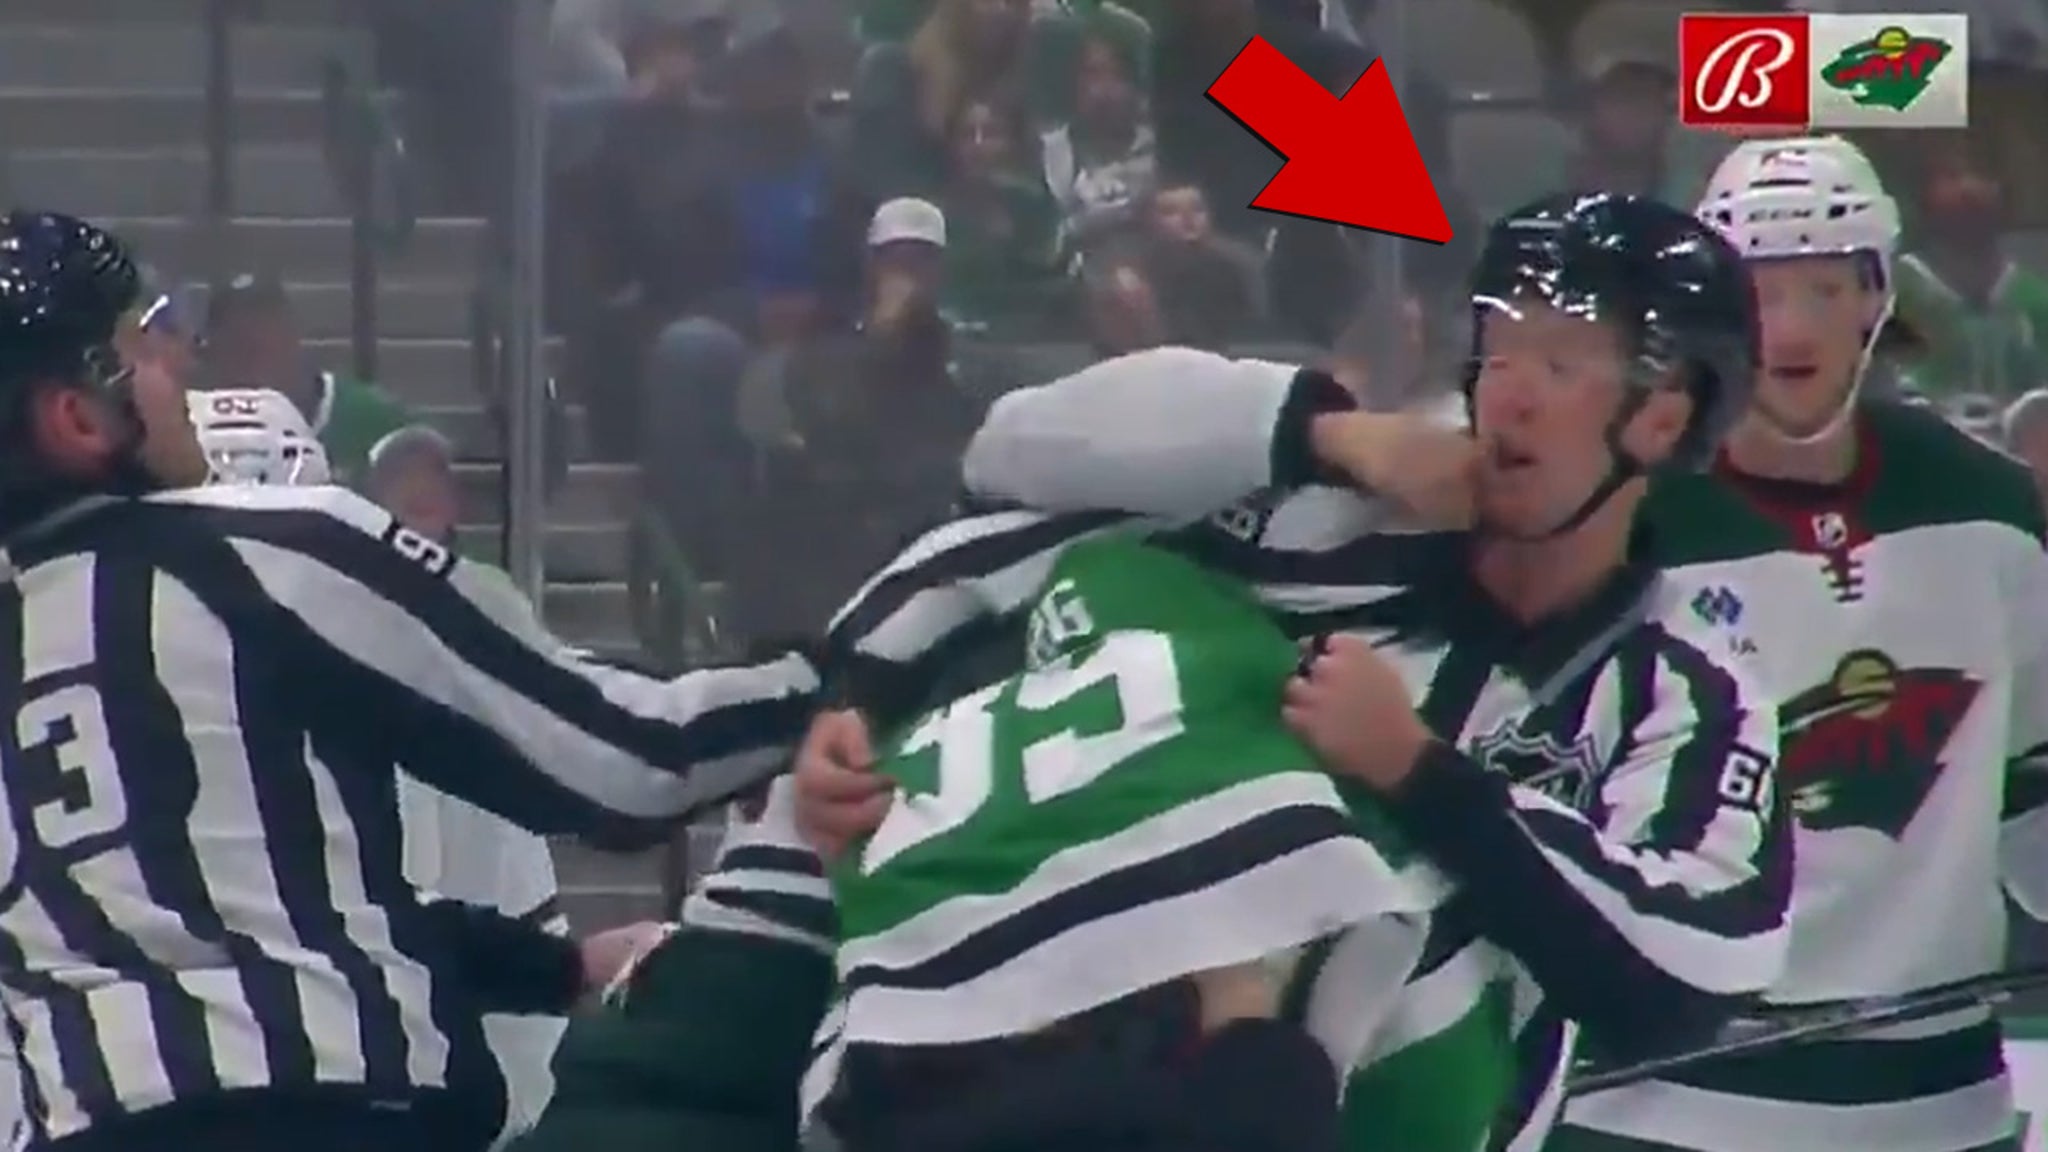 NHL Ref Punched In Face During Wild vs